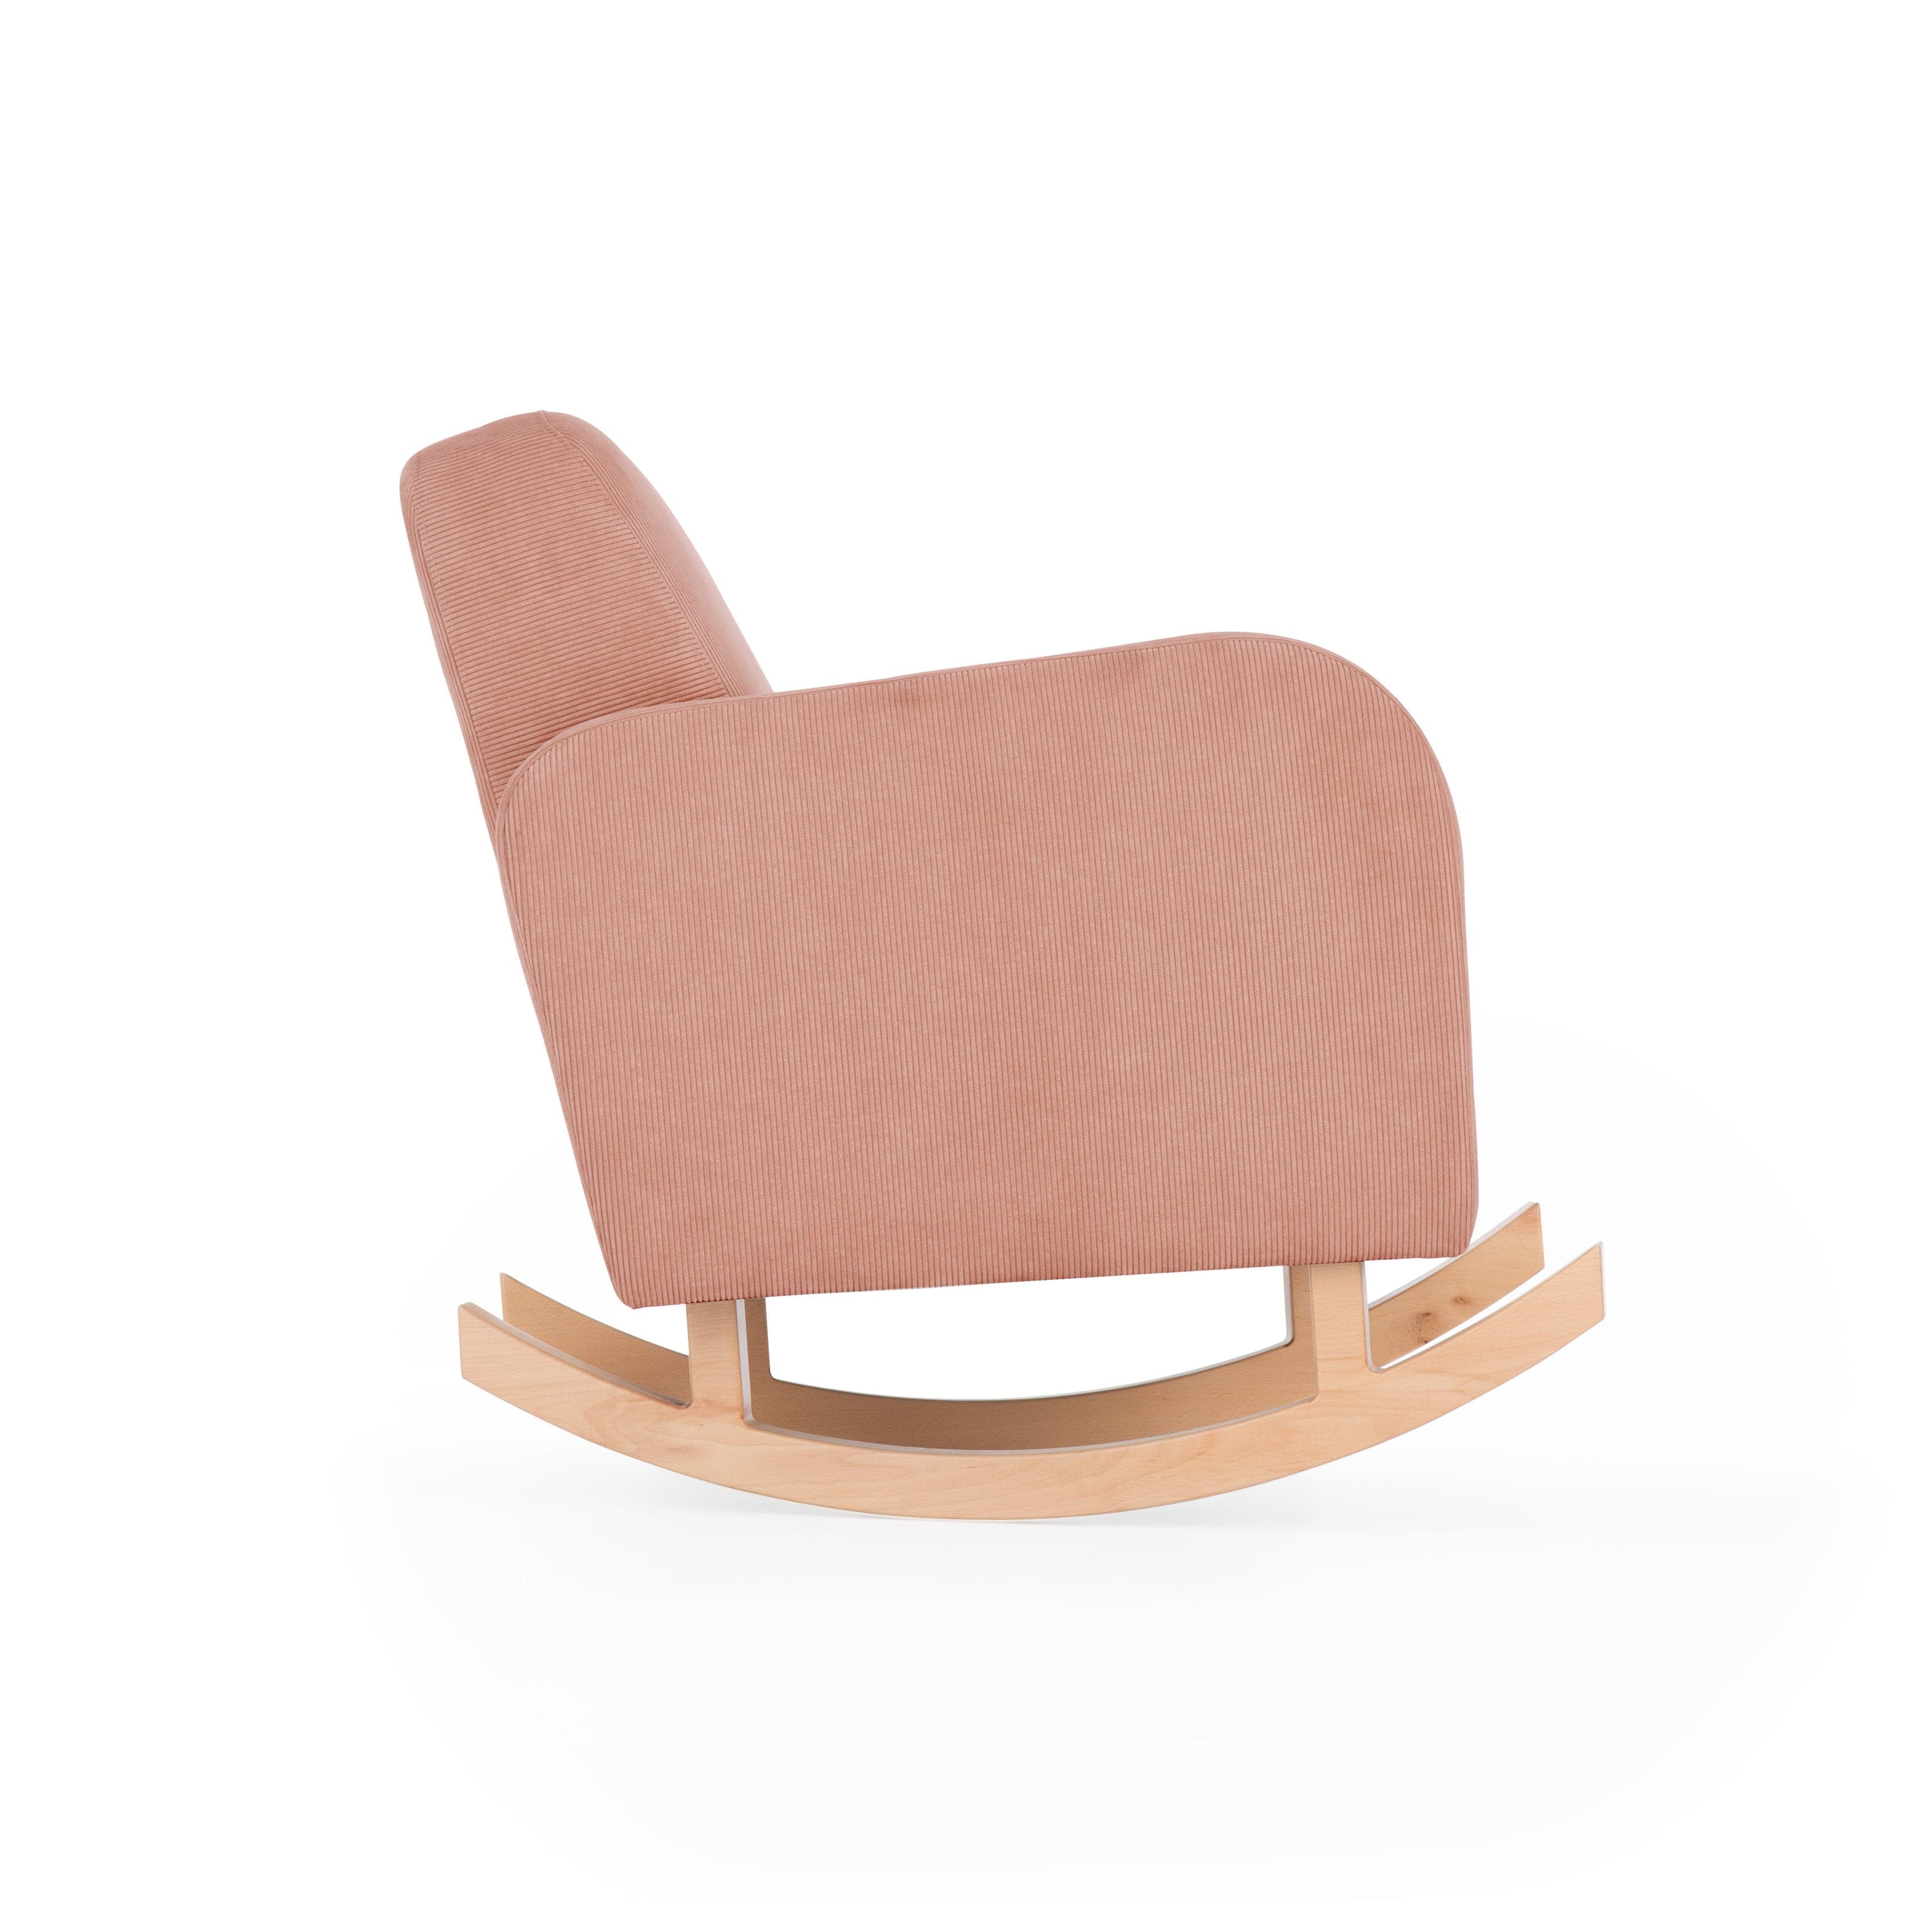 Cuddleco Etta Nursing Chair - Coral - For Your Little One